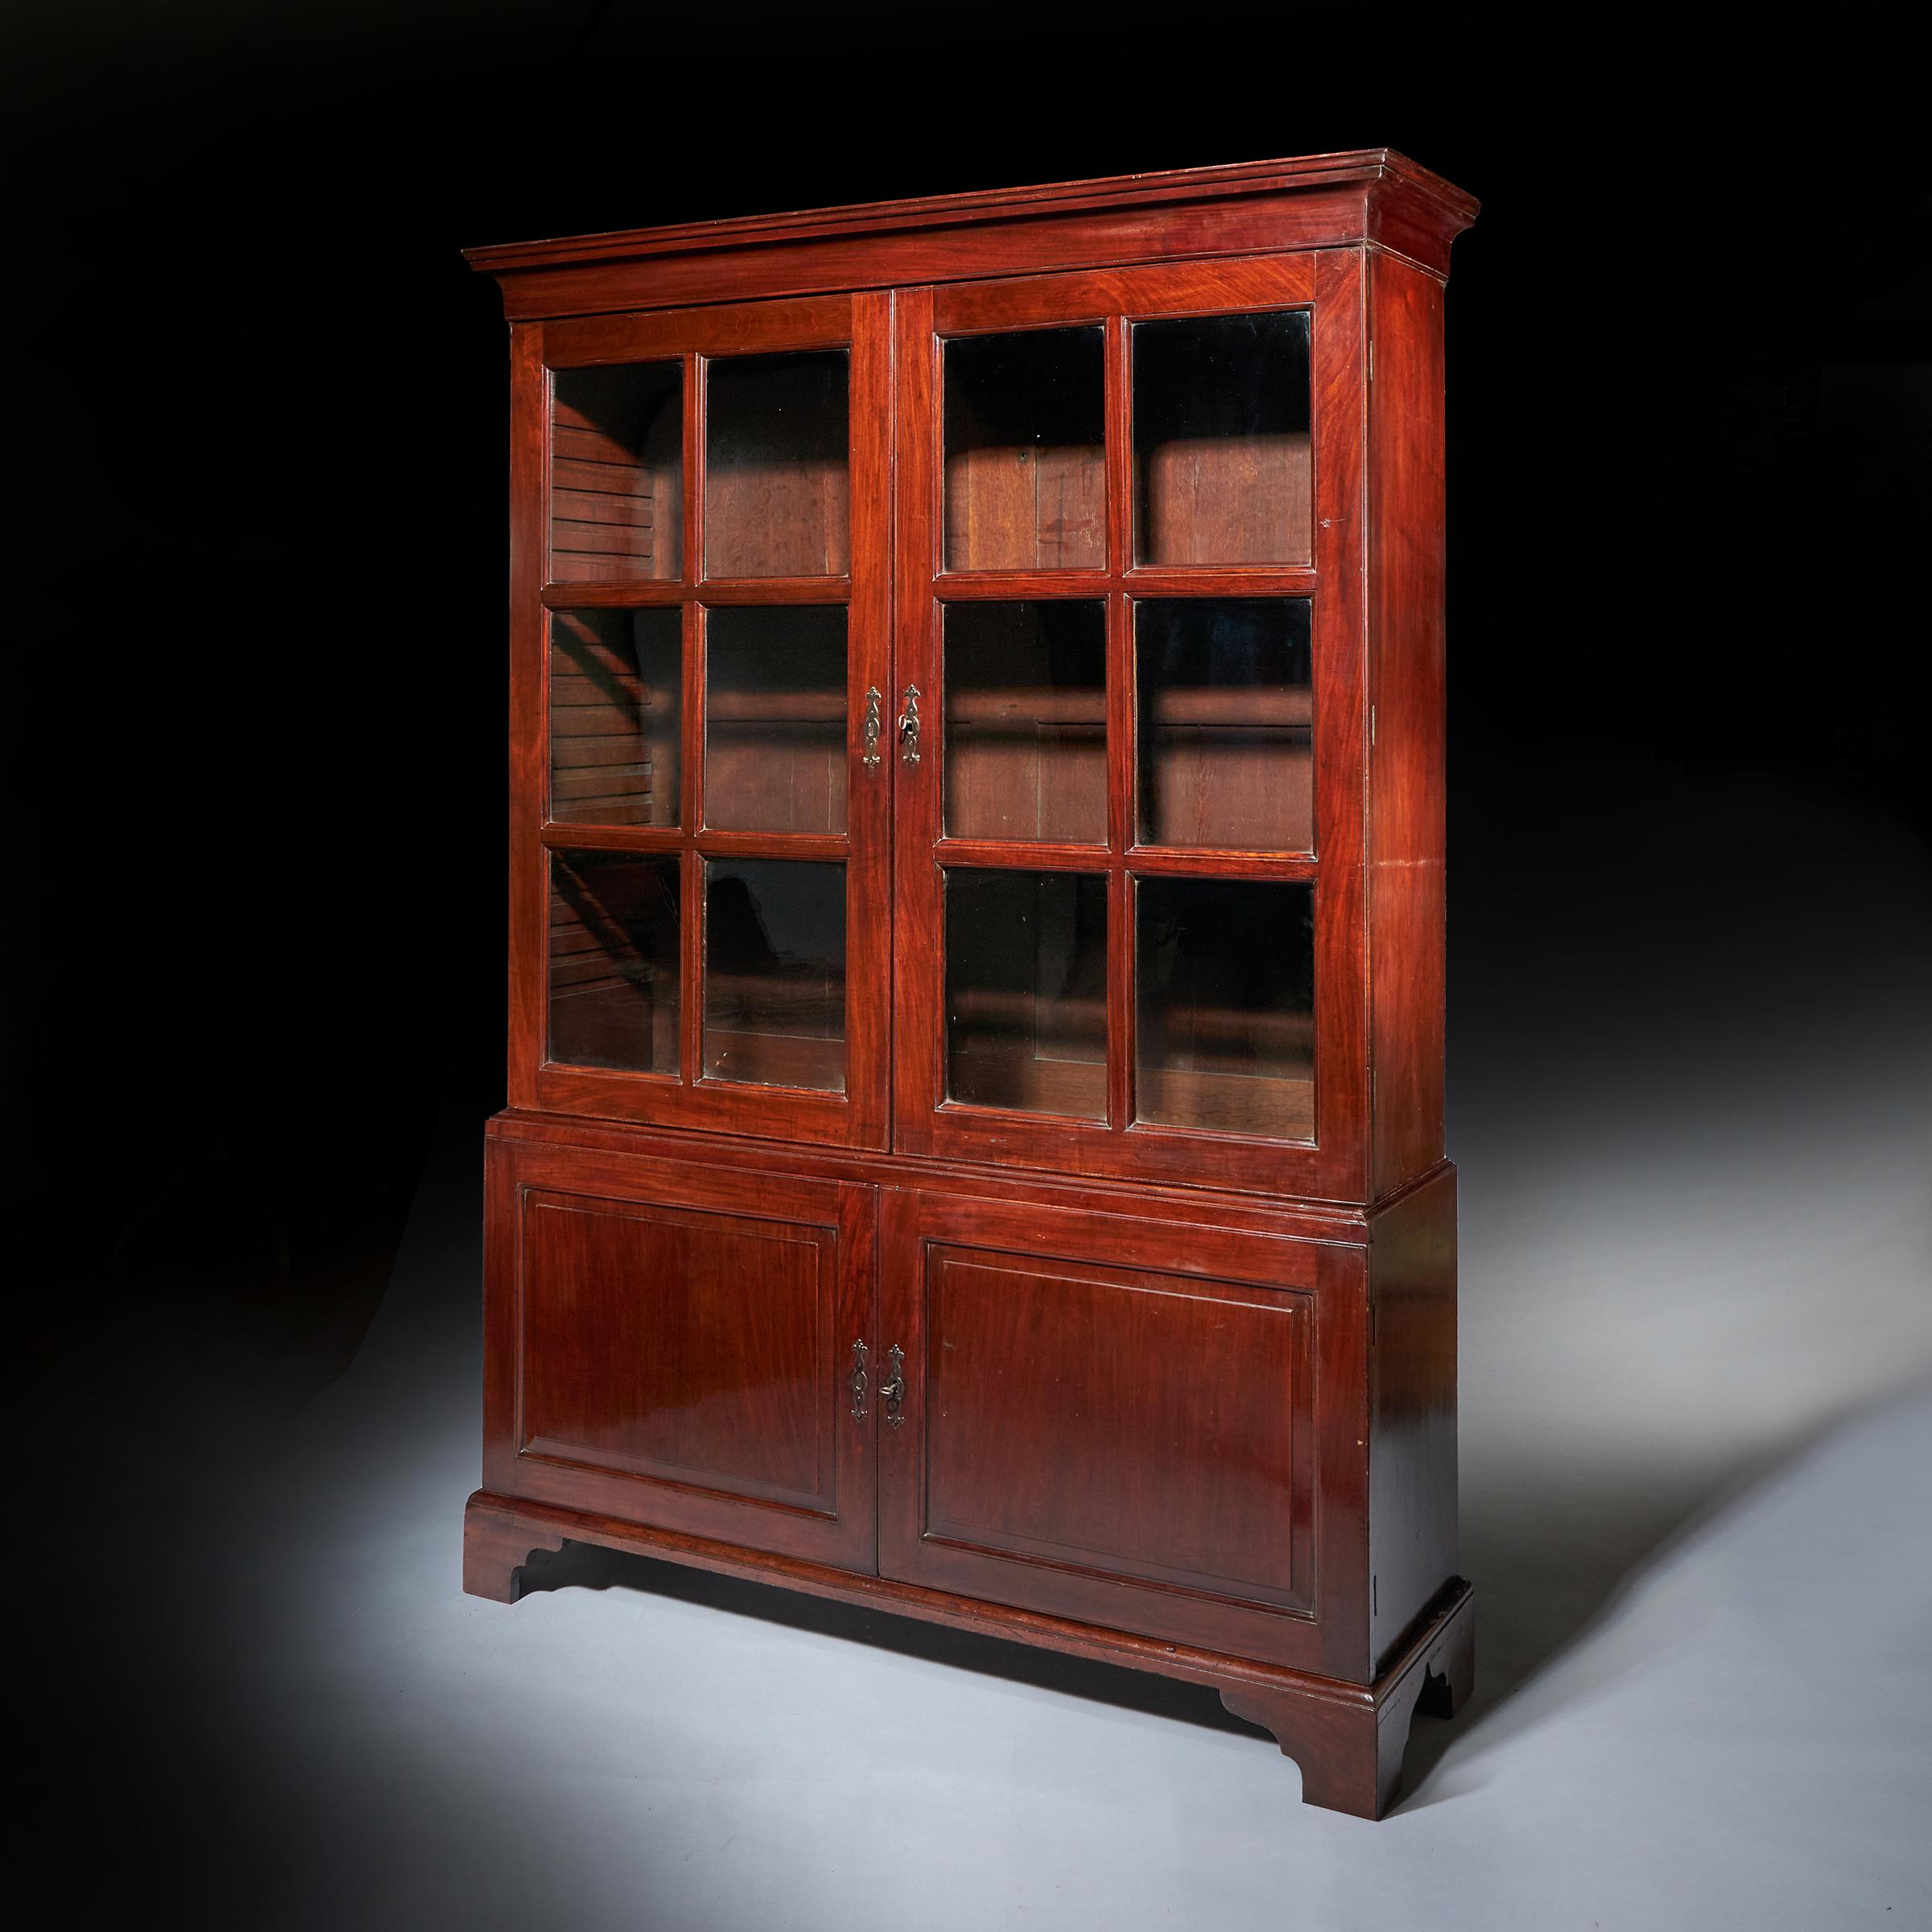 18th Century George II Chippendale Period two-door mahogany Glazed bookcase, circa 1750

The concave cornice sits above a pair of glazed doors. The antique glass is divided by moulded glazing bars, opening to the original adjustable shelves.